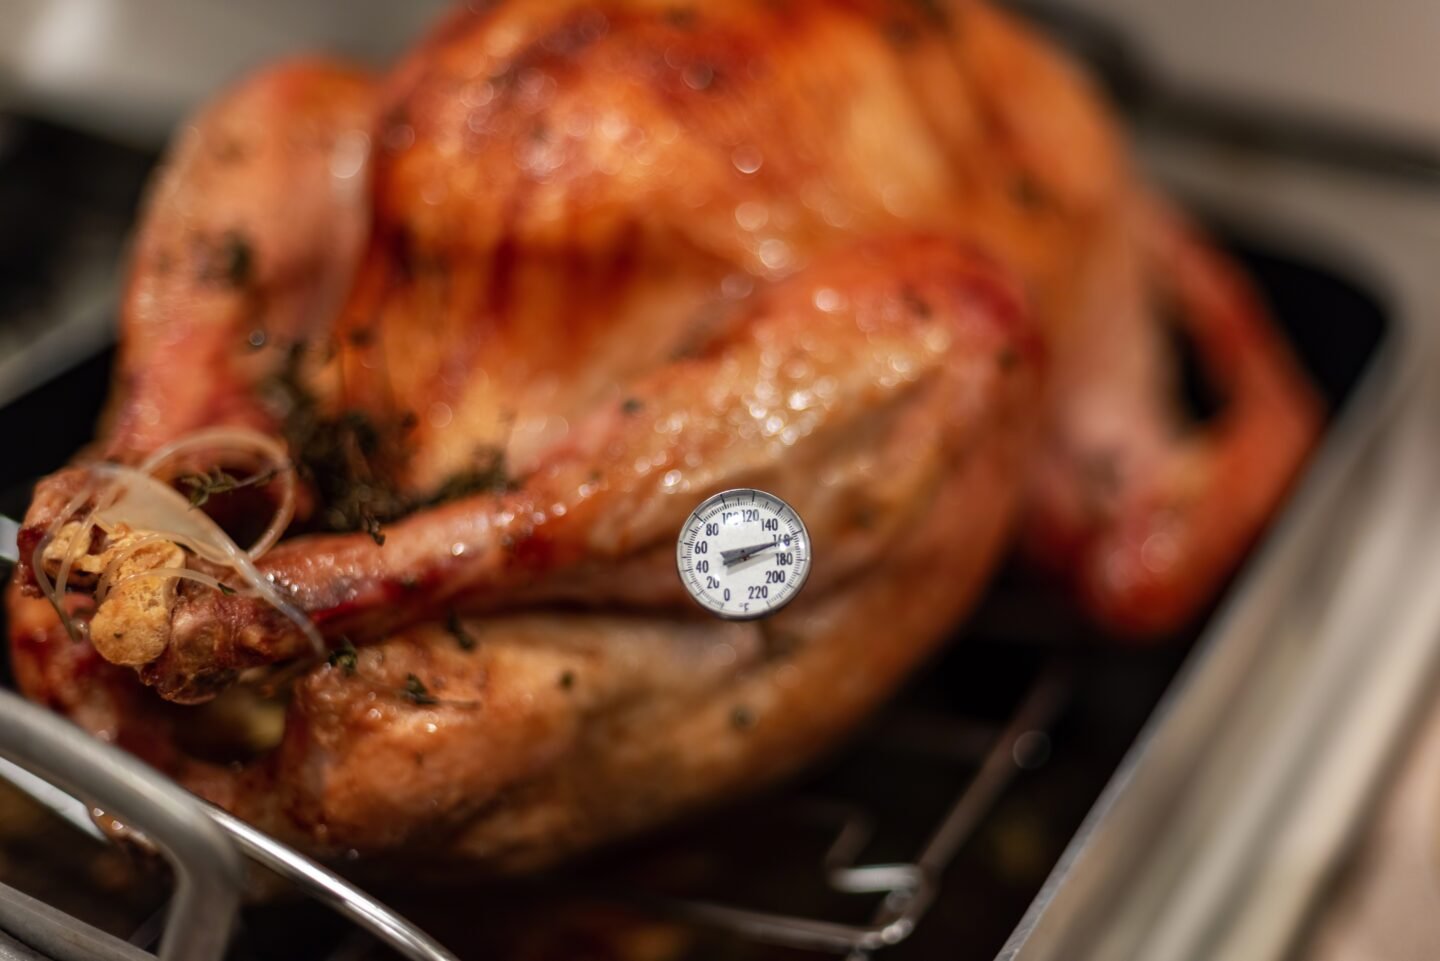 Using a meat thermometer to make sure the turkey is done.